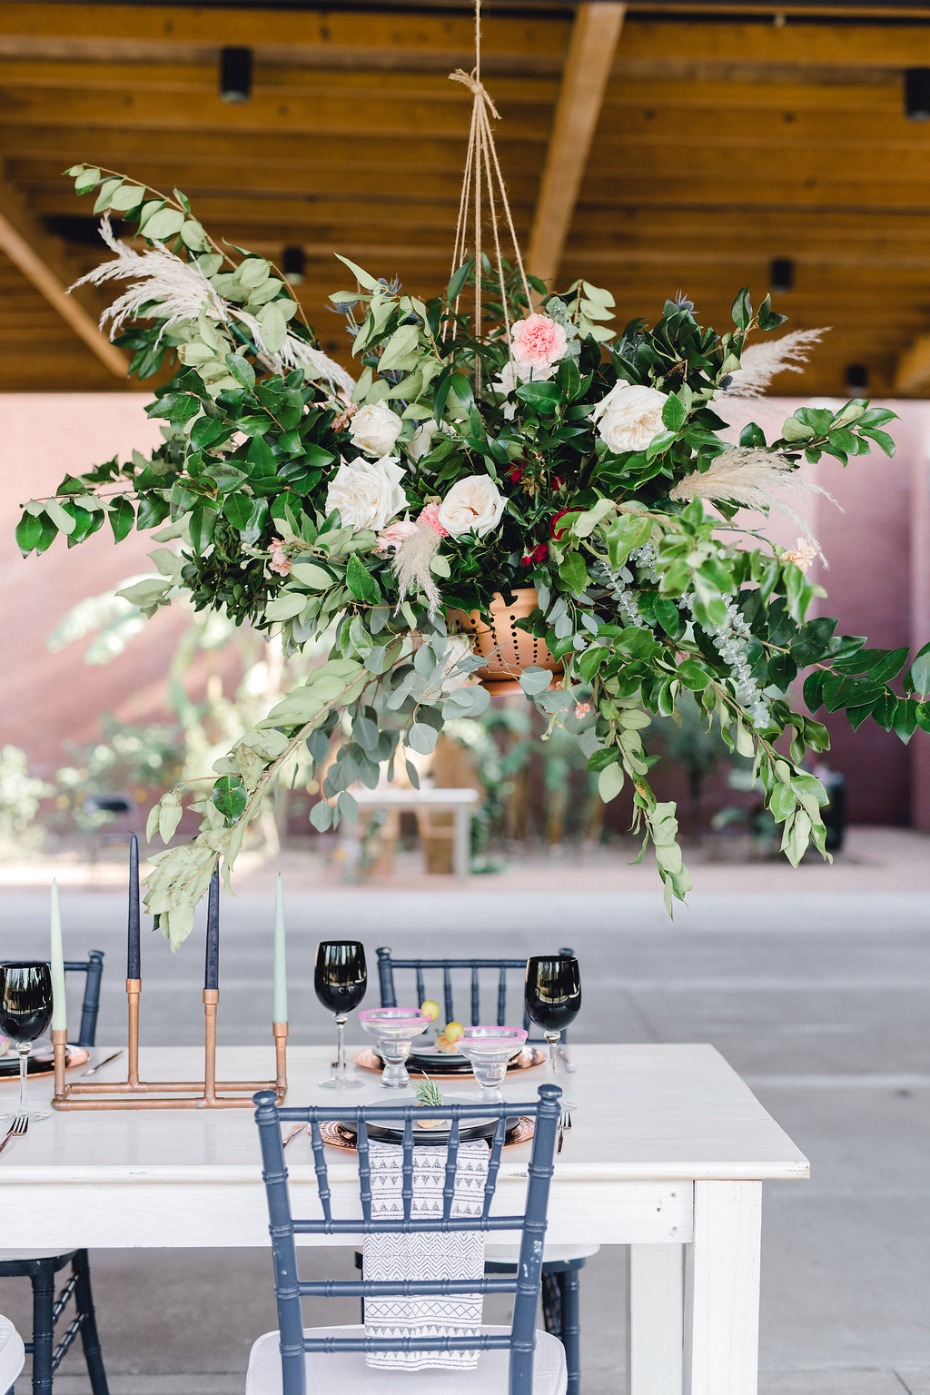 Use hanging arrangements over the reception table